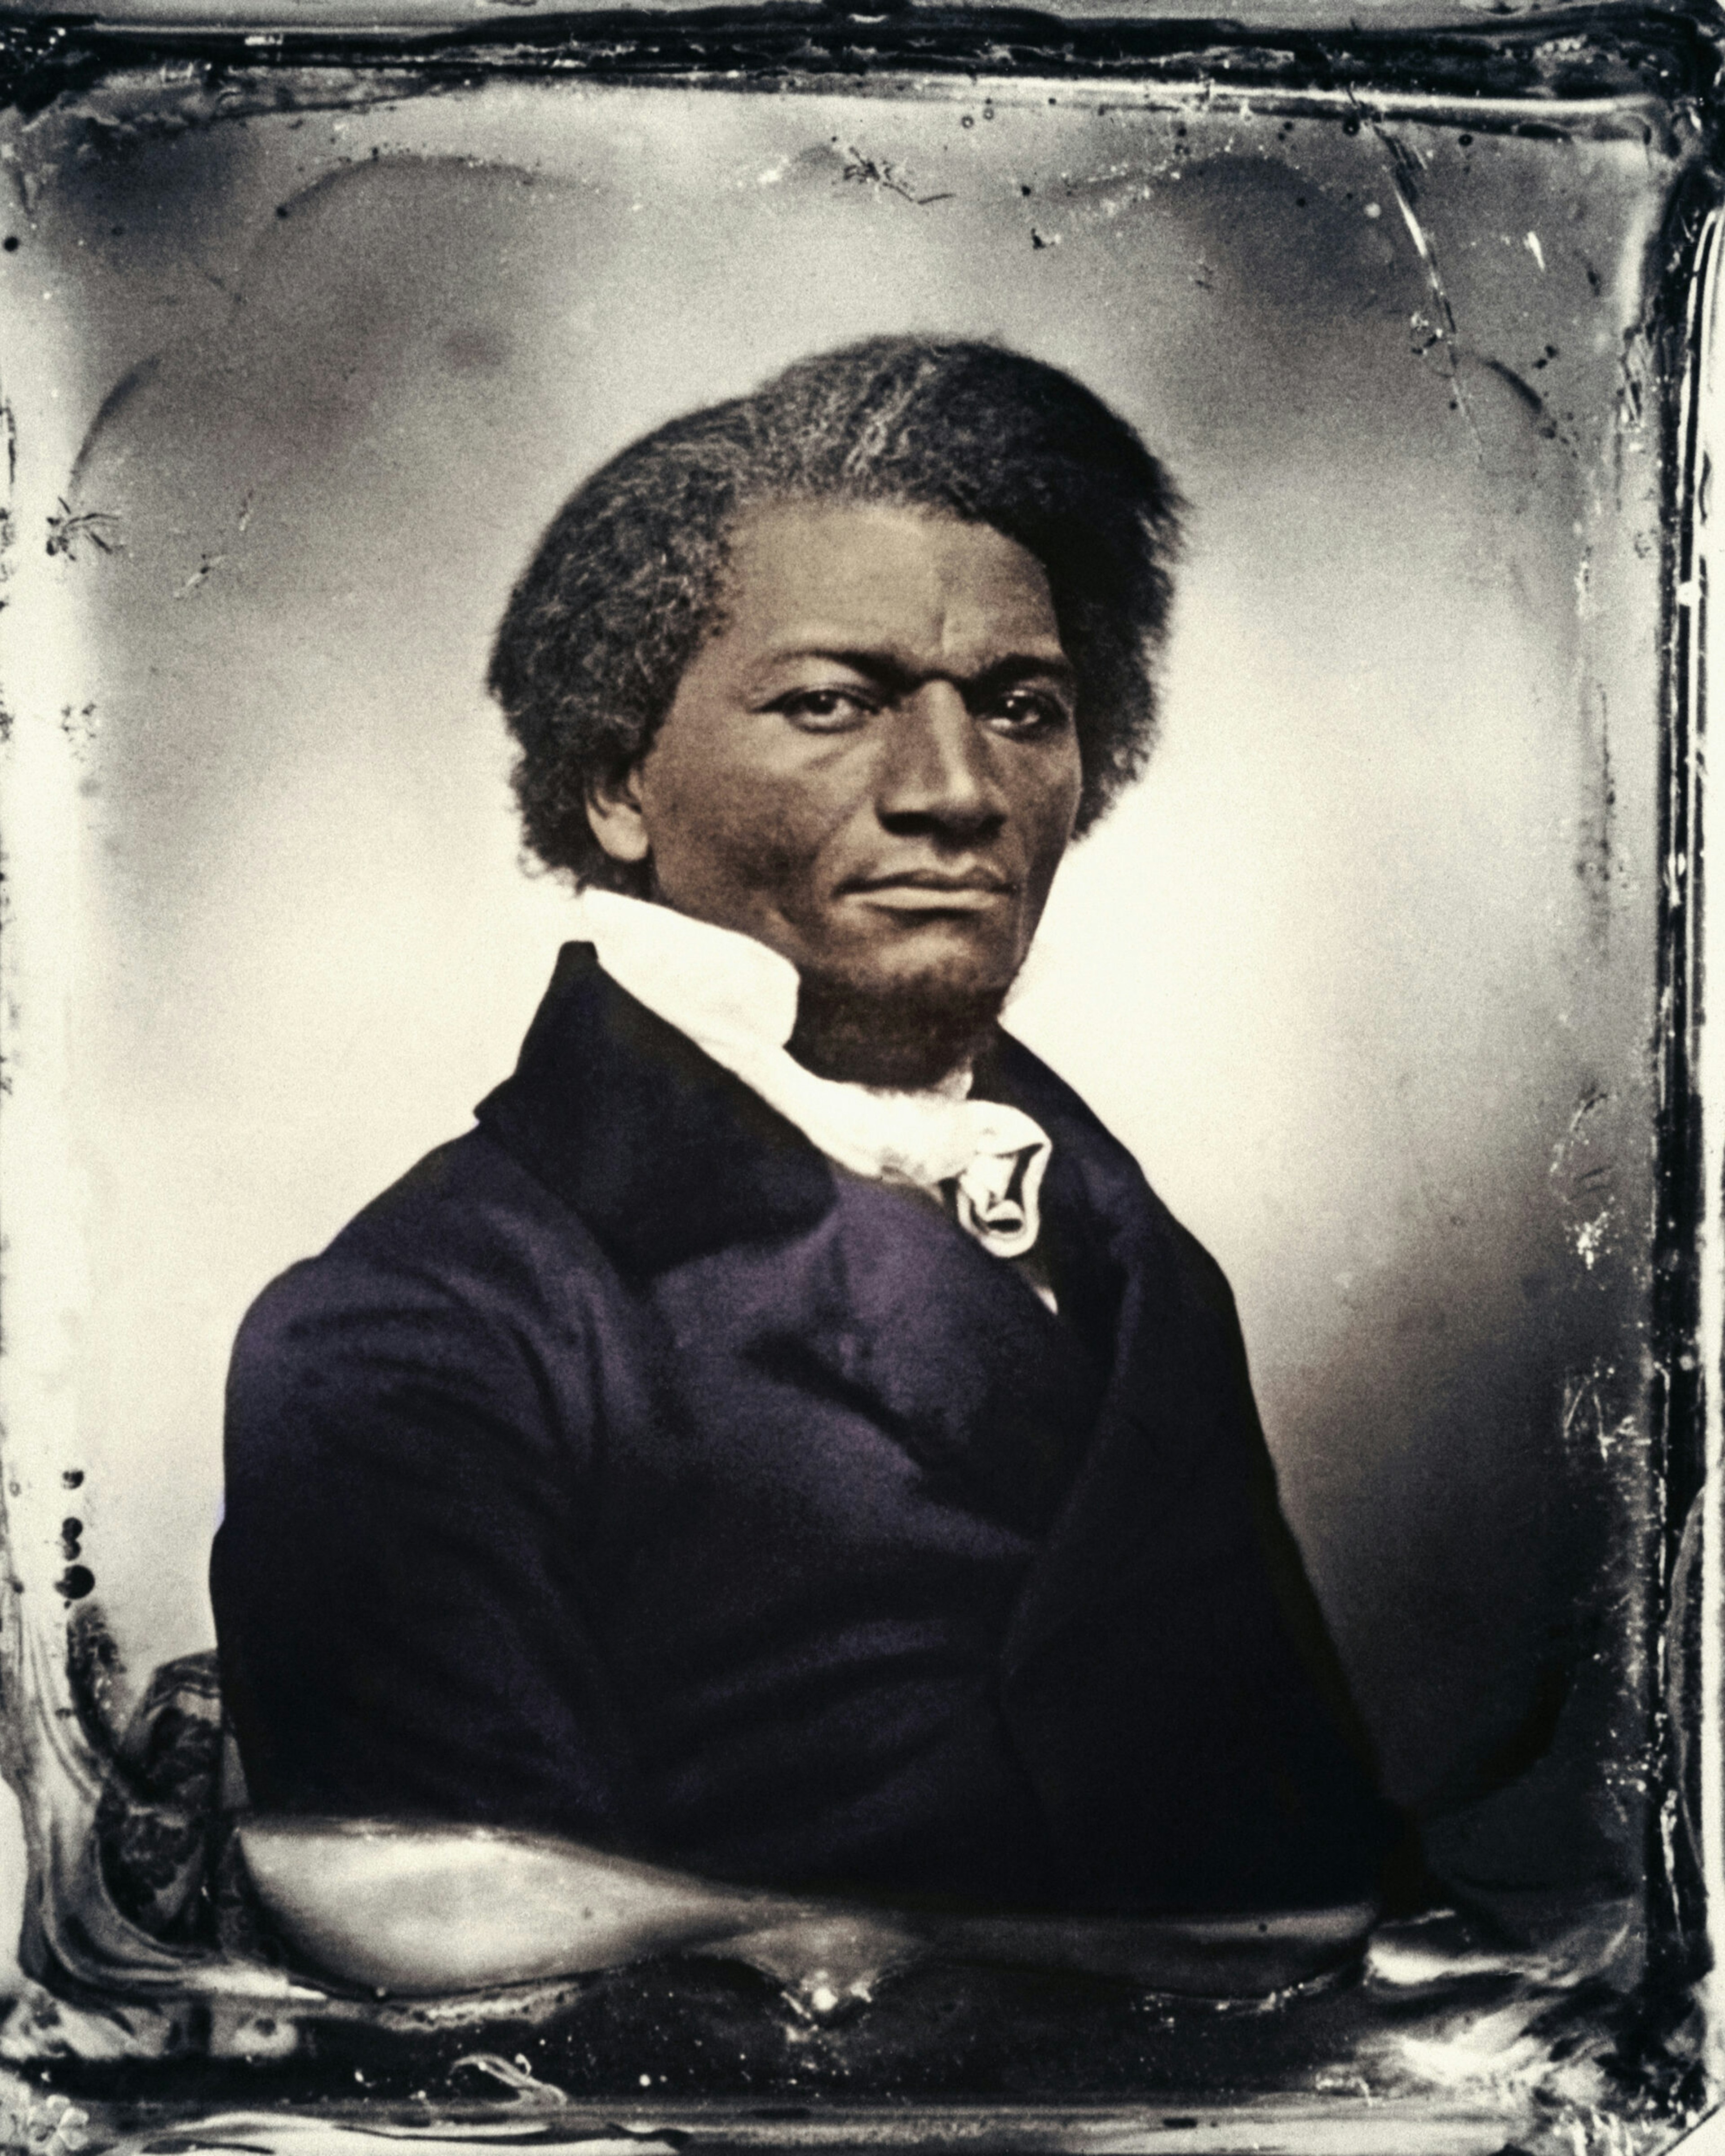 Born into slavery, American writer and abolitionist Frederick Douglass (1817-1895) bought his freedom with income earned from lecturing abroad after the publication of his autobiography, Narrative of the Life of Frederick Douglass.